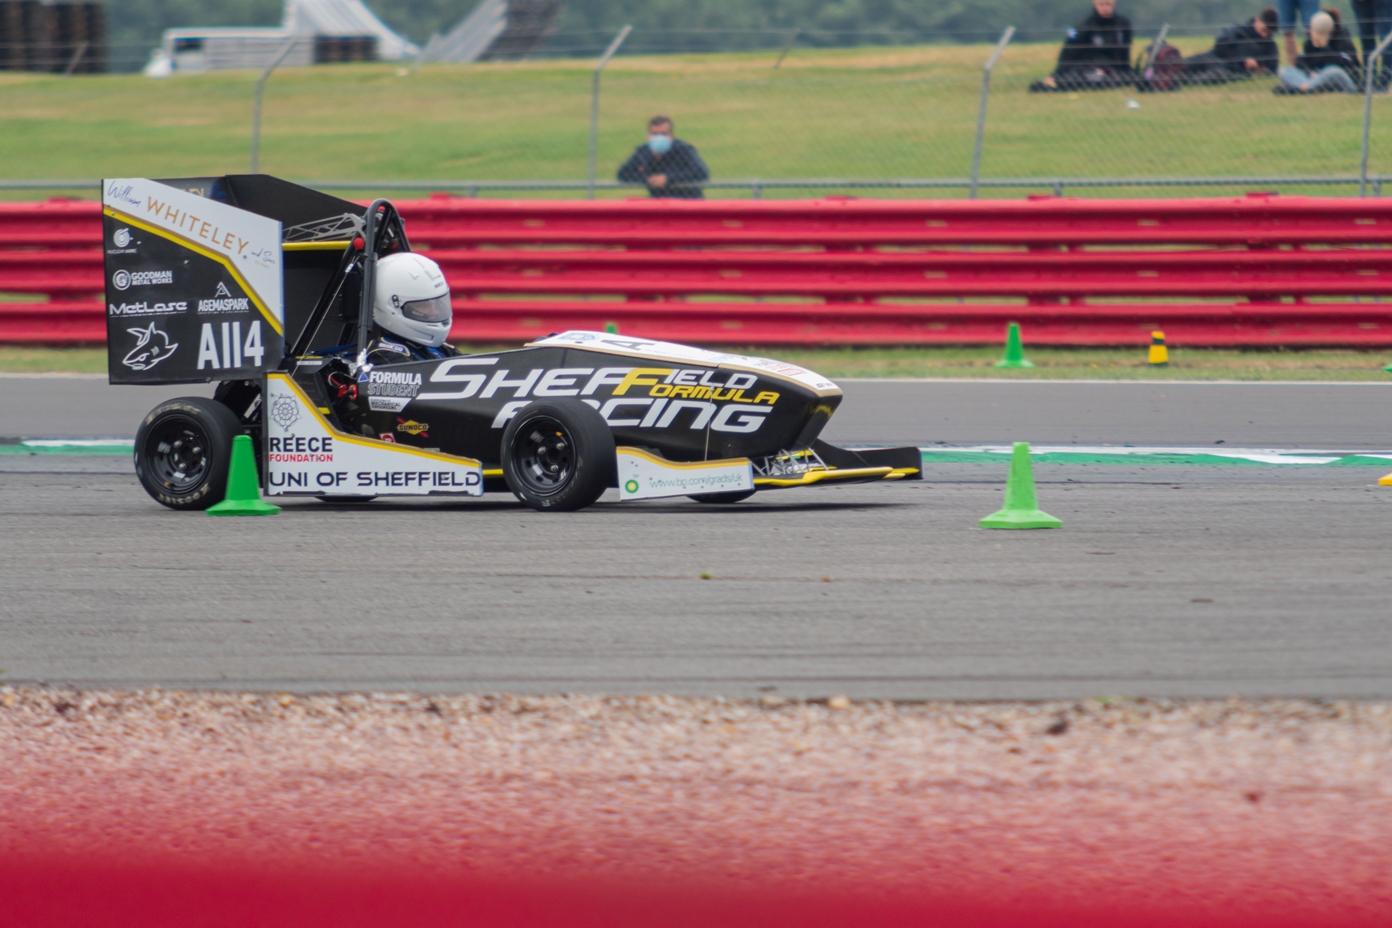 Sheffield University powered home to victory in the Formula Student championship